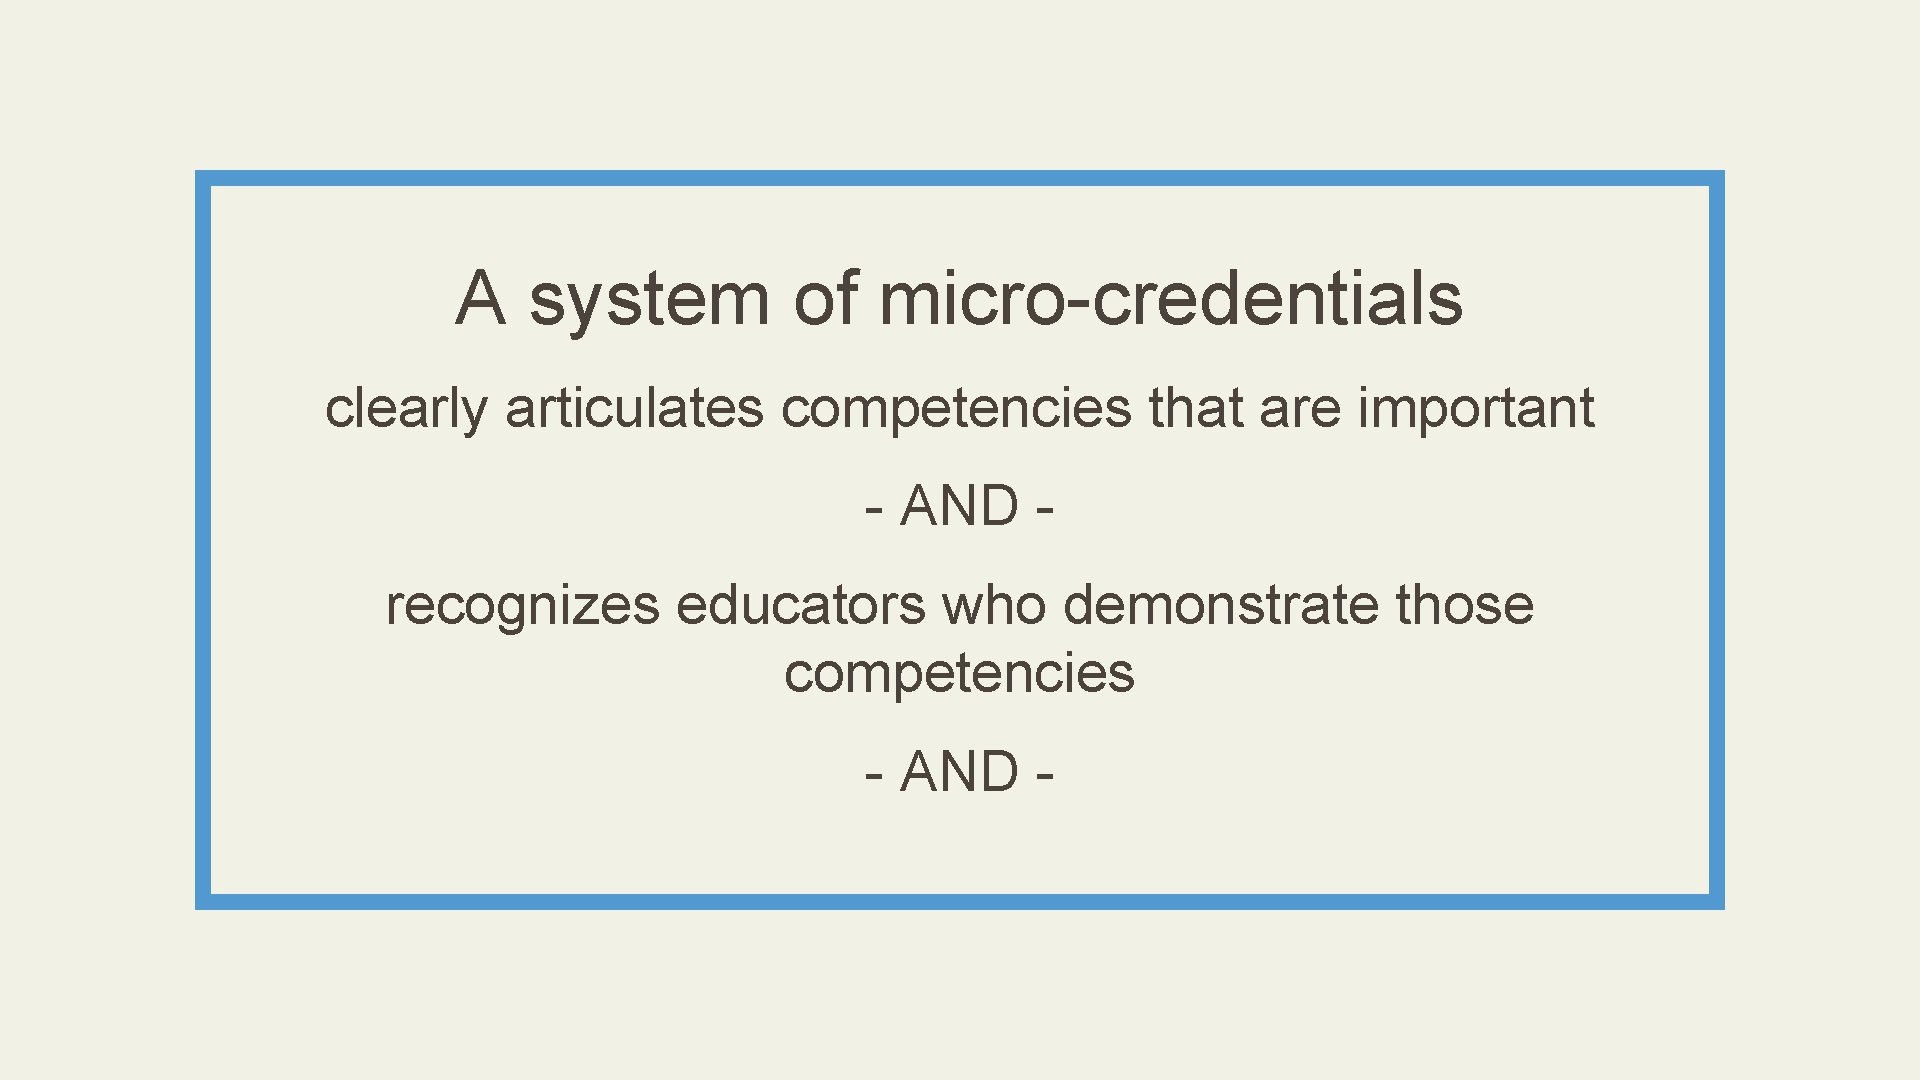 A system of micro-credentials clearly articulates competencies that are important - AND - recognizes